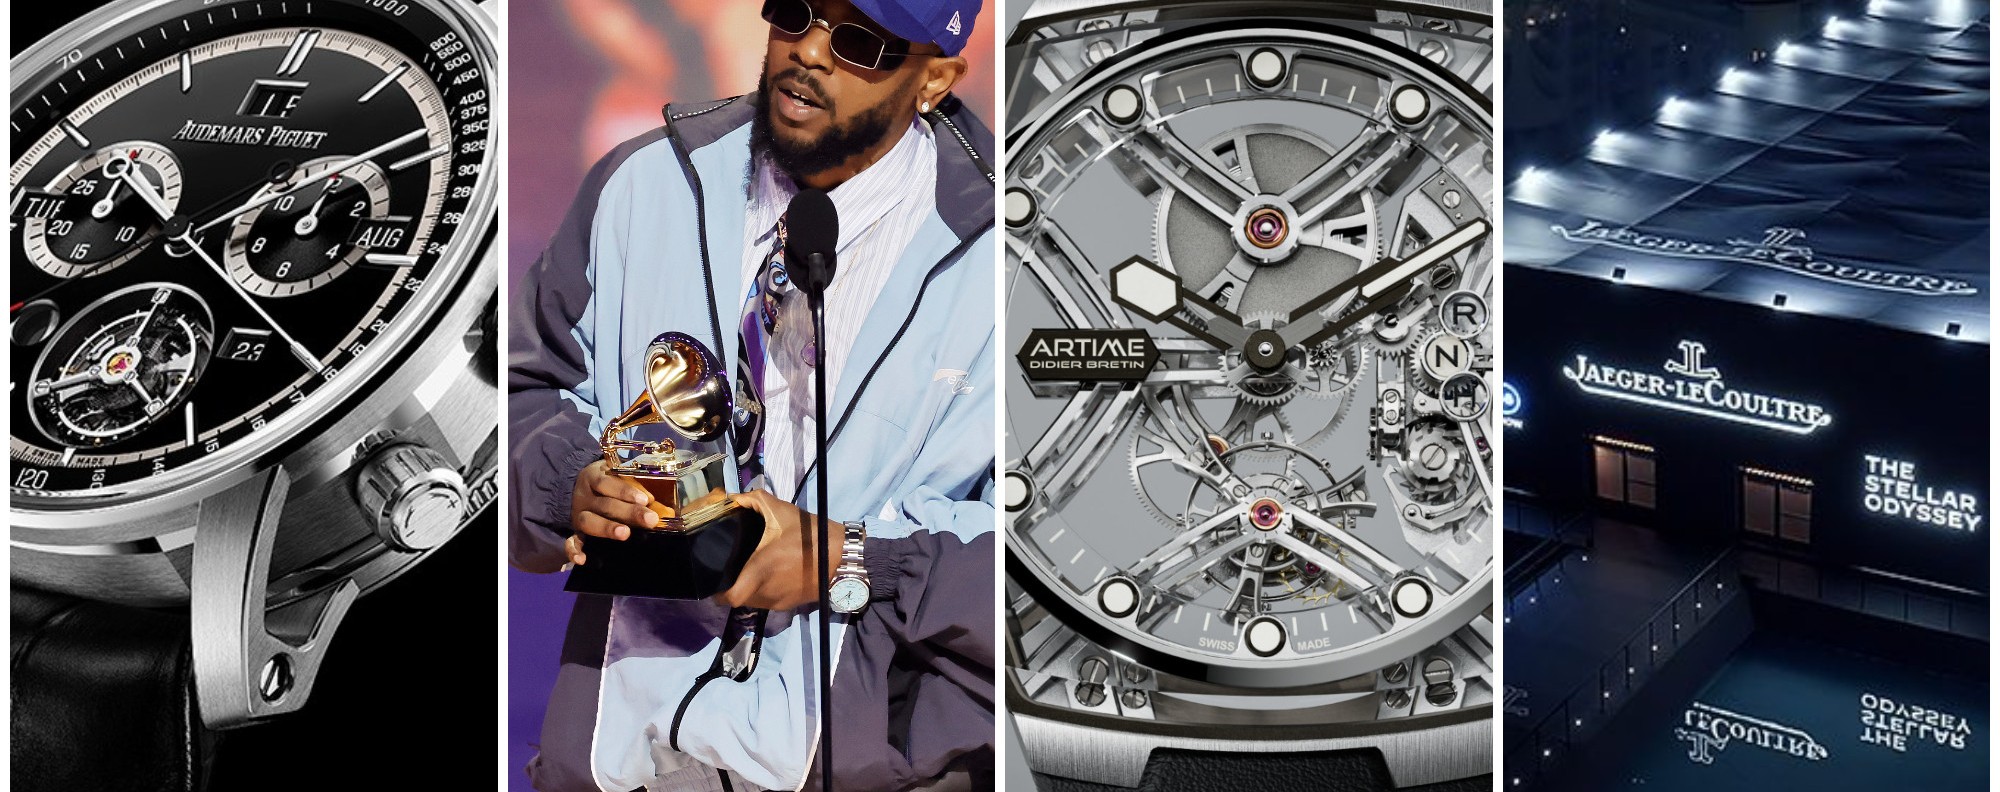 5 biggest timepiece moments in February: Rihanna and Jay-Z flaunted watches  at the Super Bowl and Grammys, plus the most exciting new releases from  Audemars Piguet, Jaeger-LeCoultre and Piaget | South China Morning Post